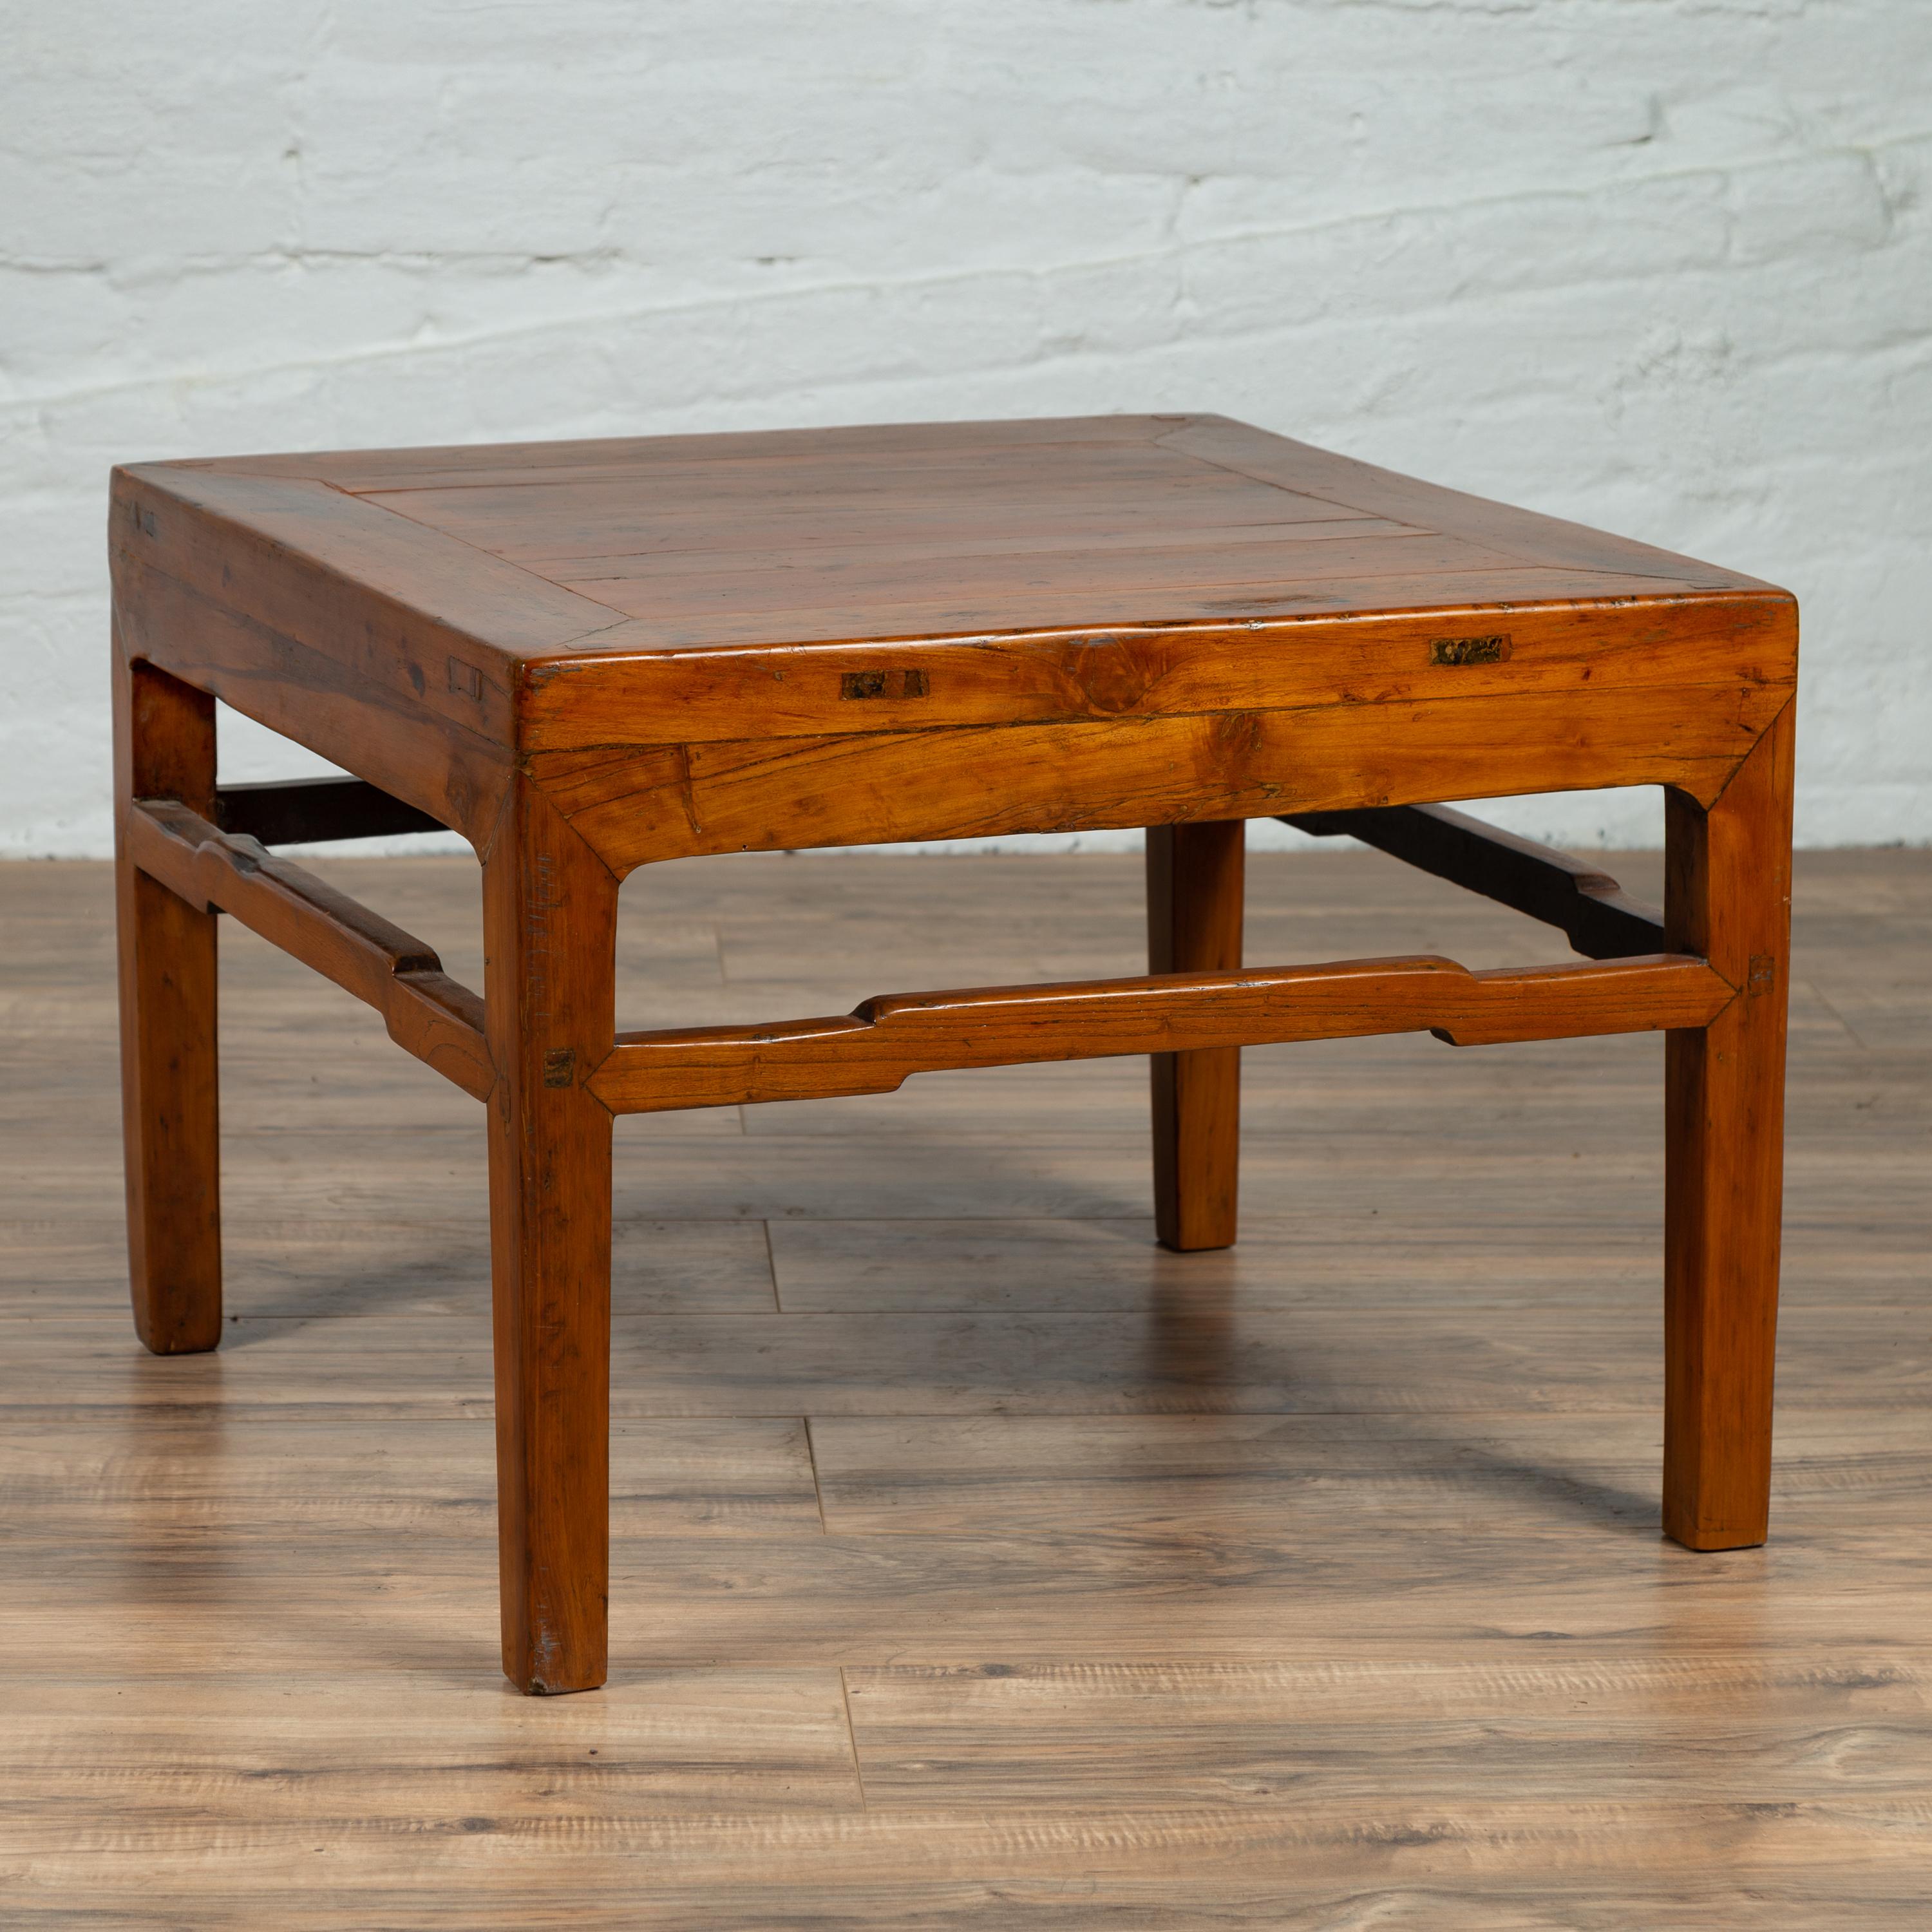 20th Century Antique Chinese Natural Wood Side Table with Blond Patina and Humpback Stretcher